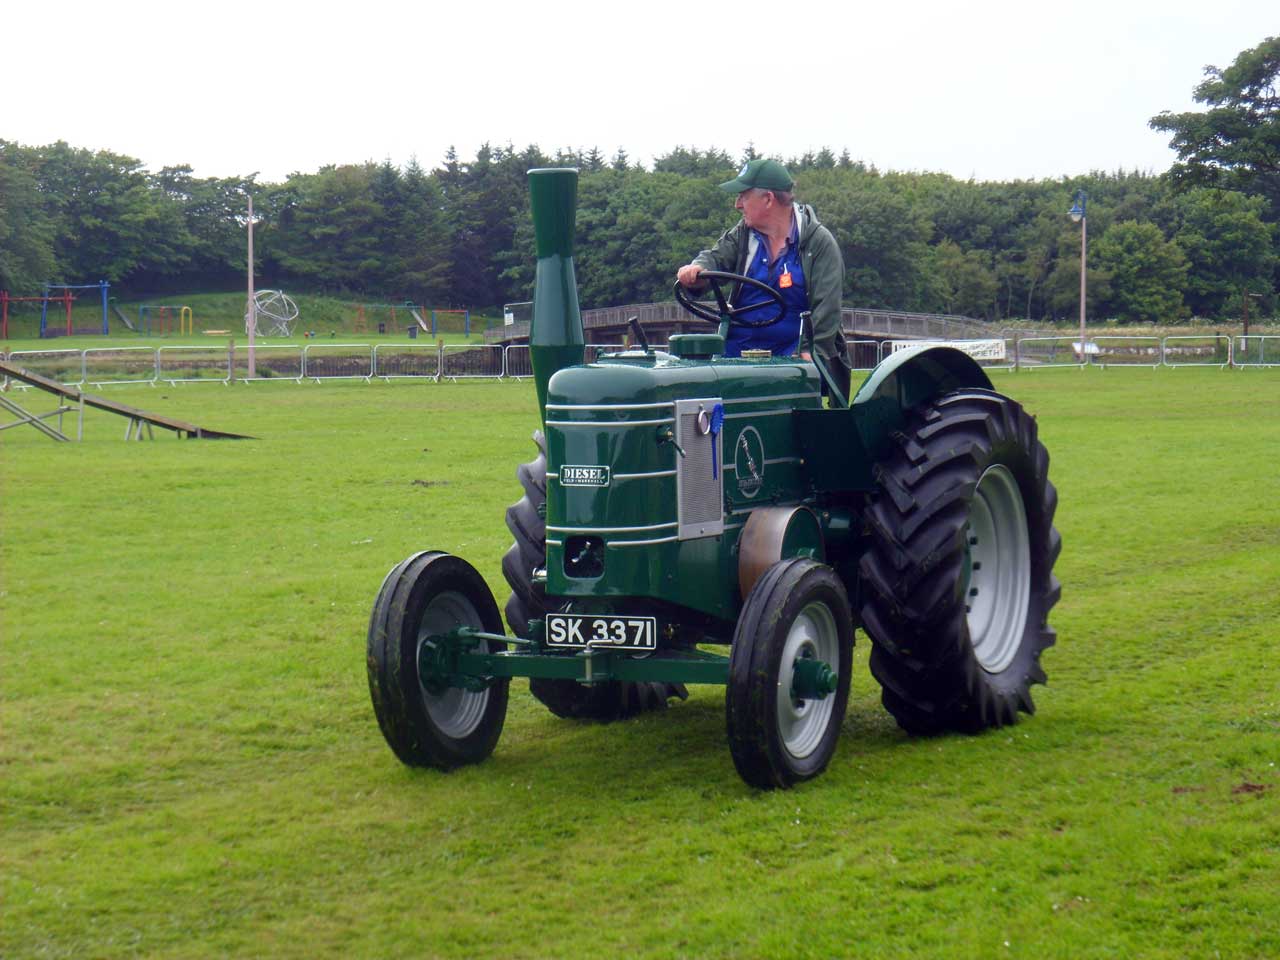 Photo: Caithness County Show 2017 - Saturday